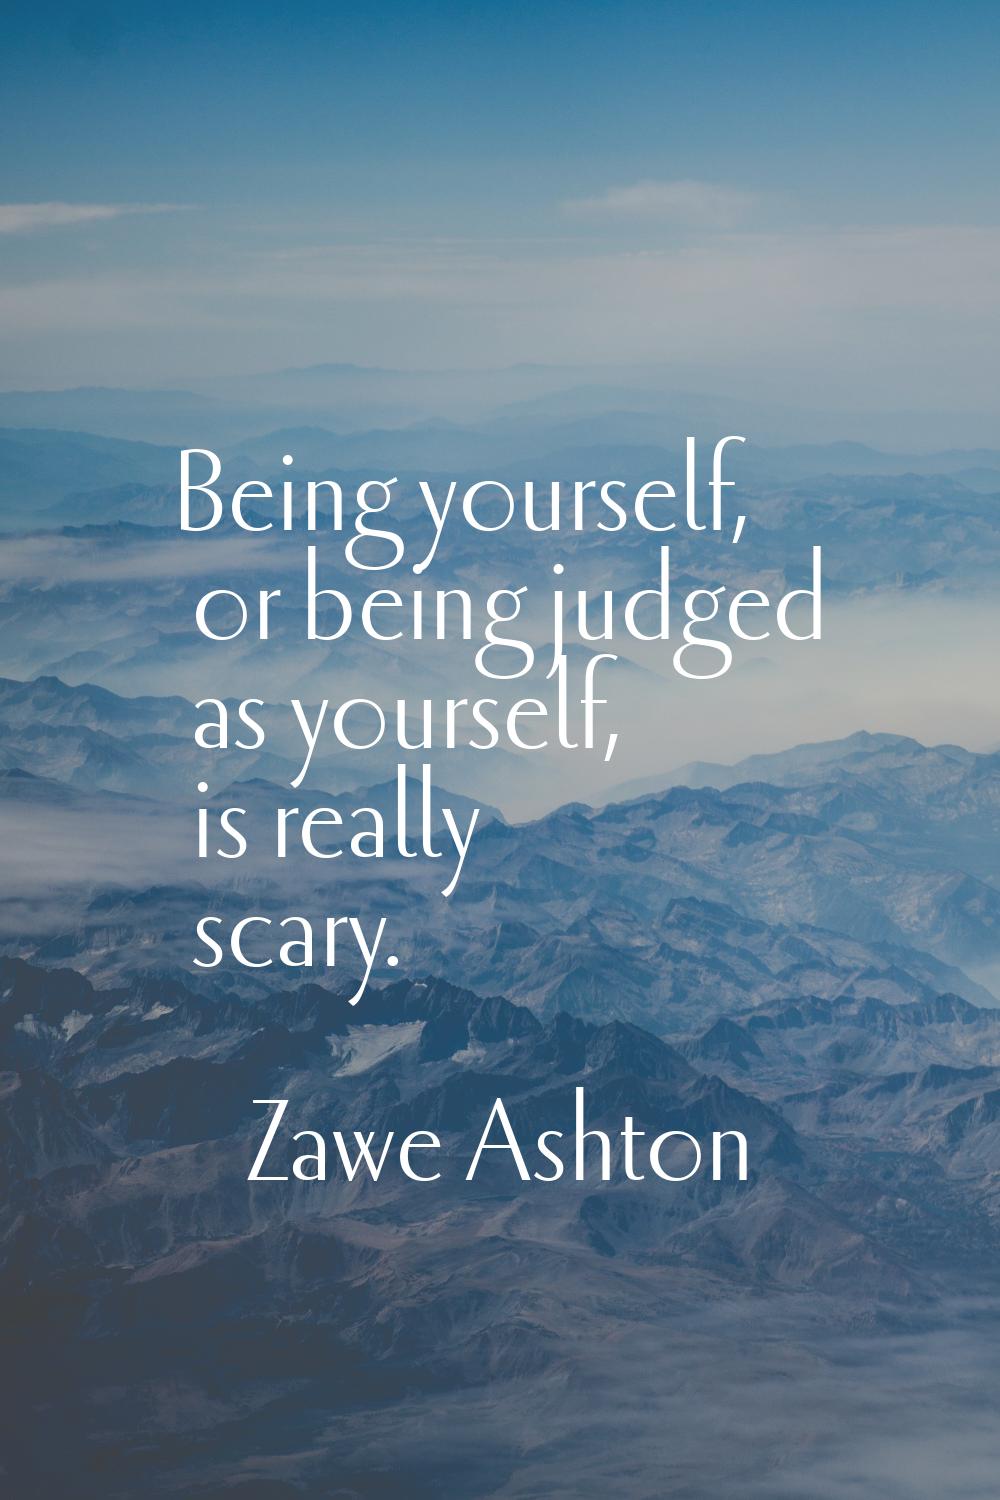 Being yourself, or being judged as yourself, is really scary.